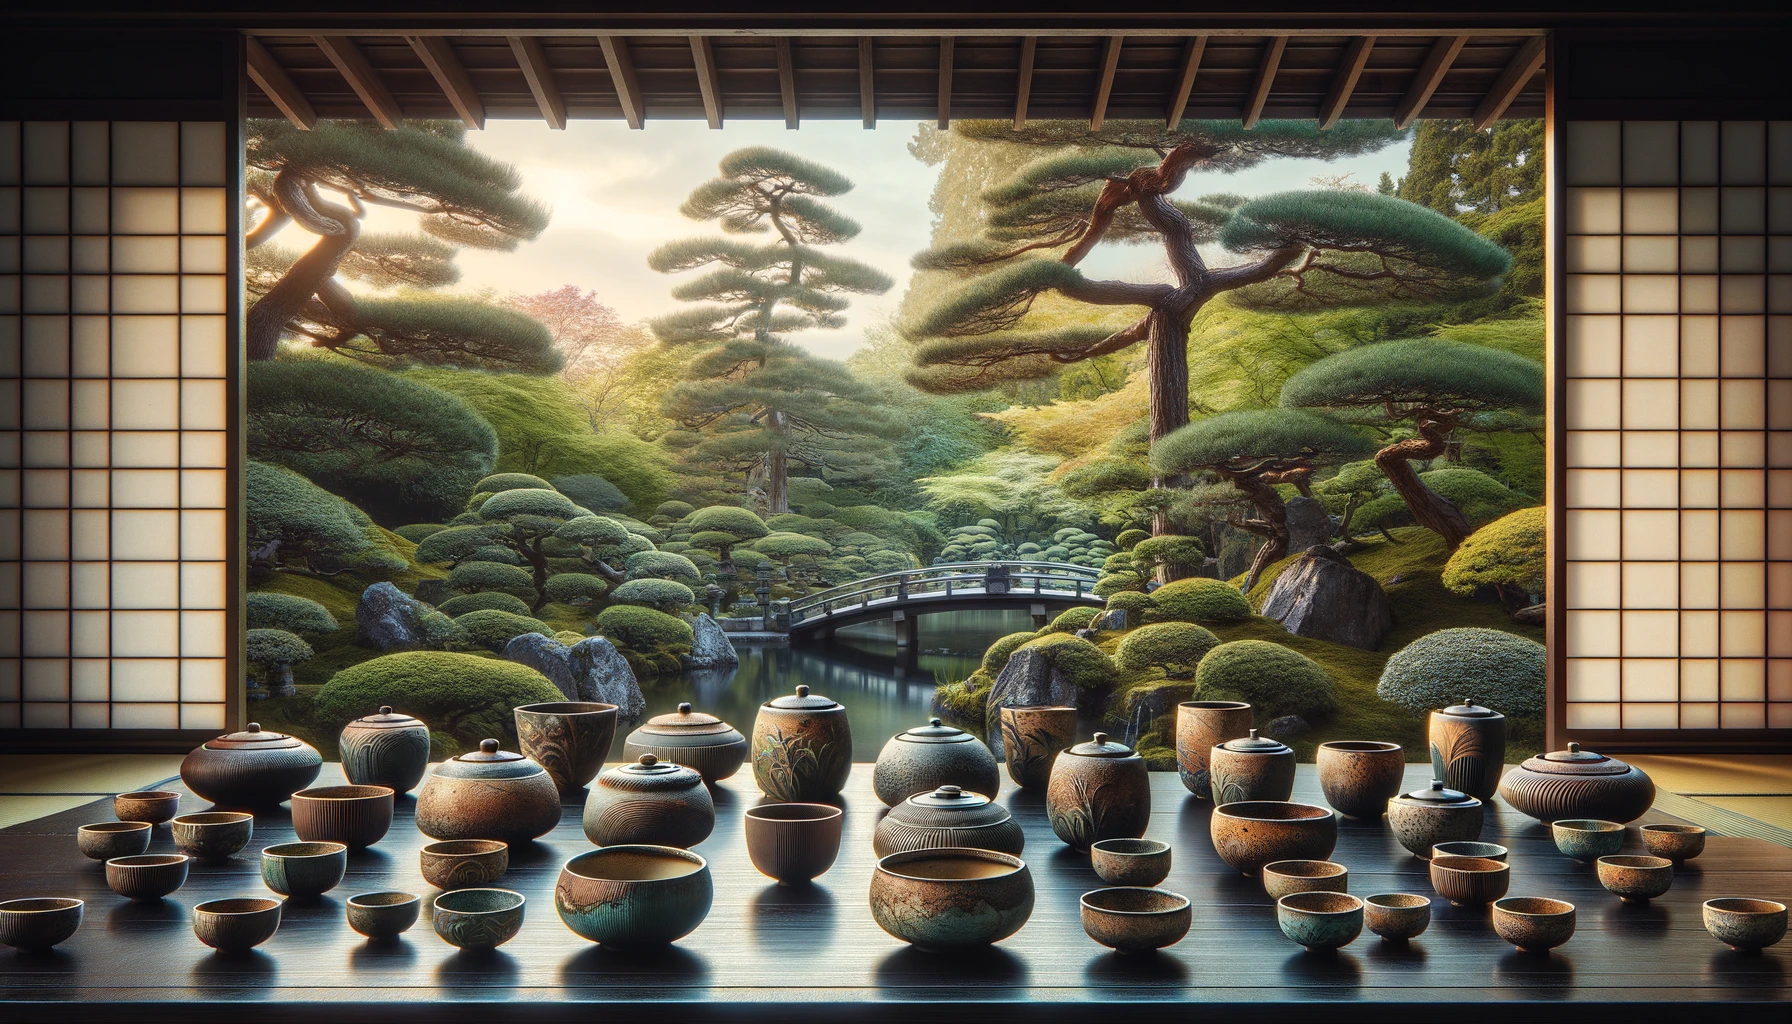 A widescreen view of an elegant display of Raku ware used for tea ceremonies, set against a traditional Japanese garden background